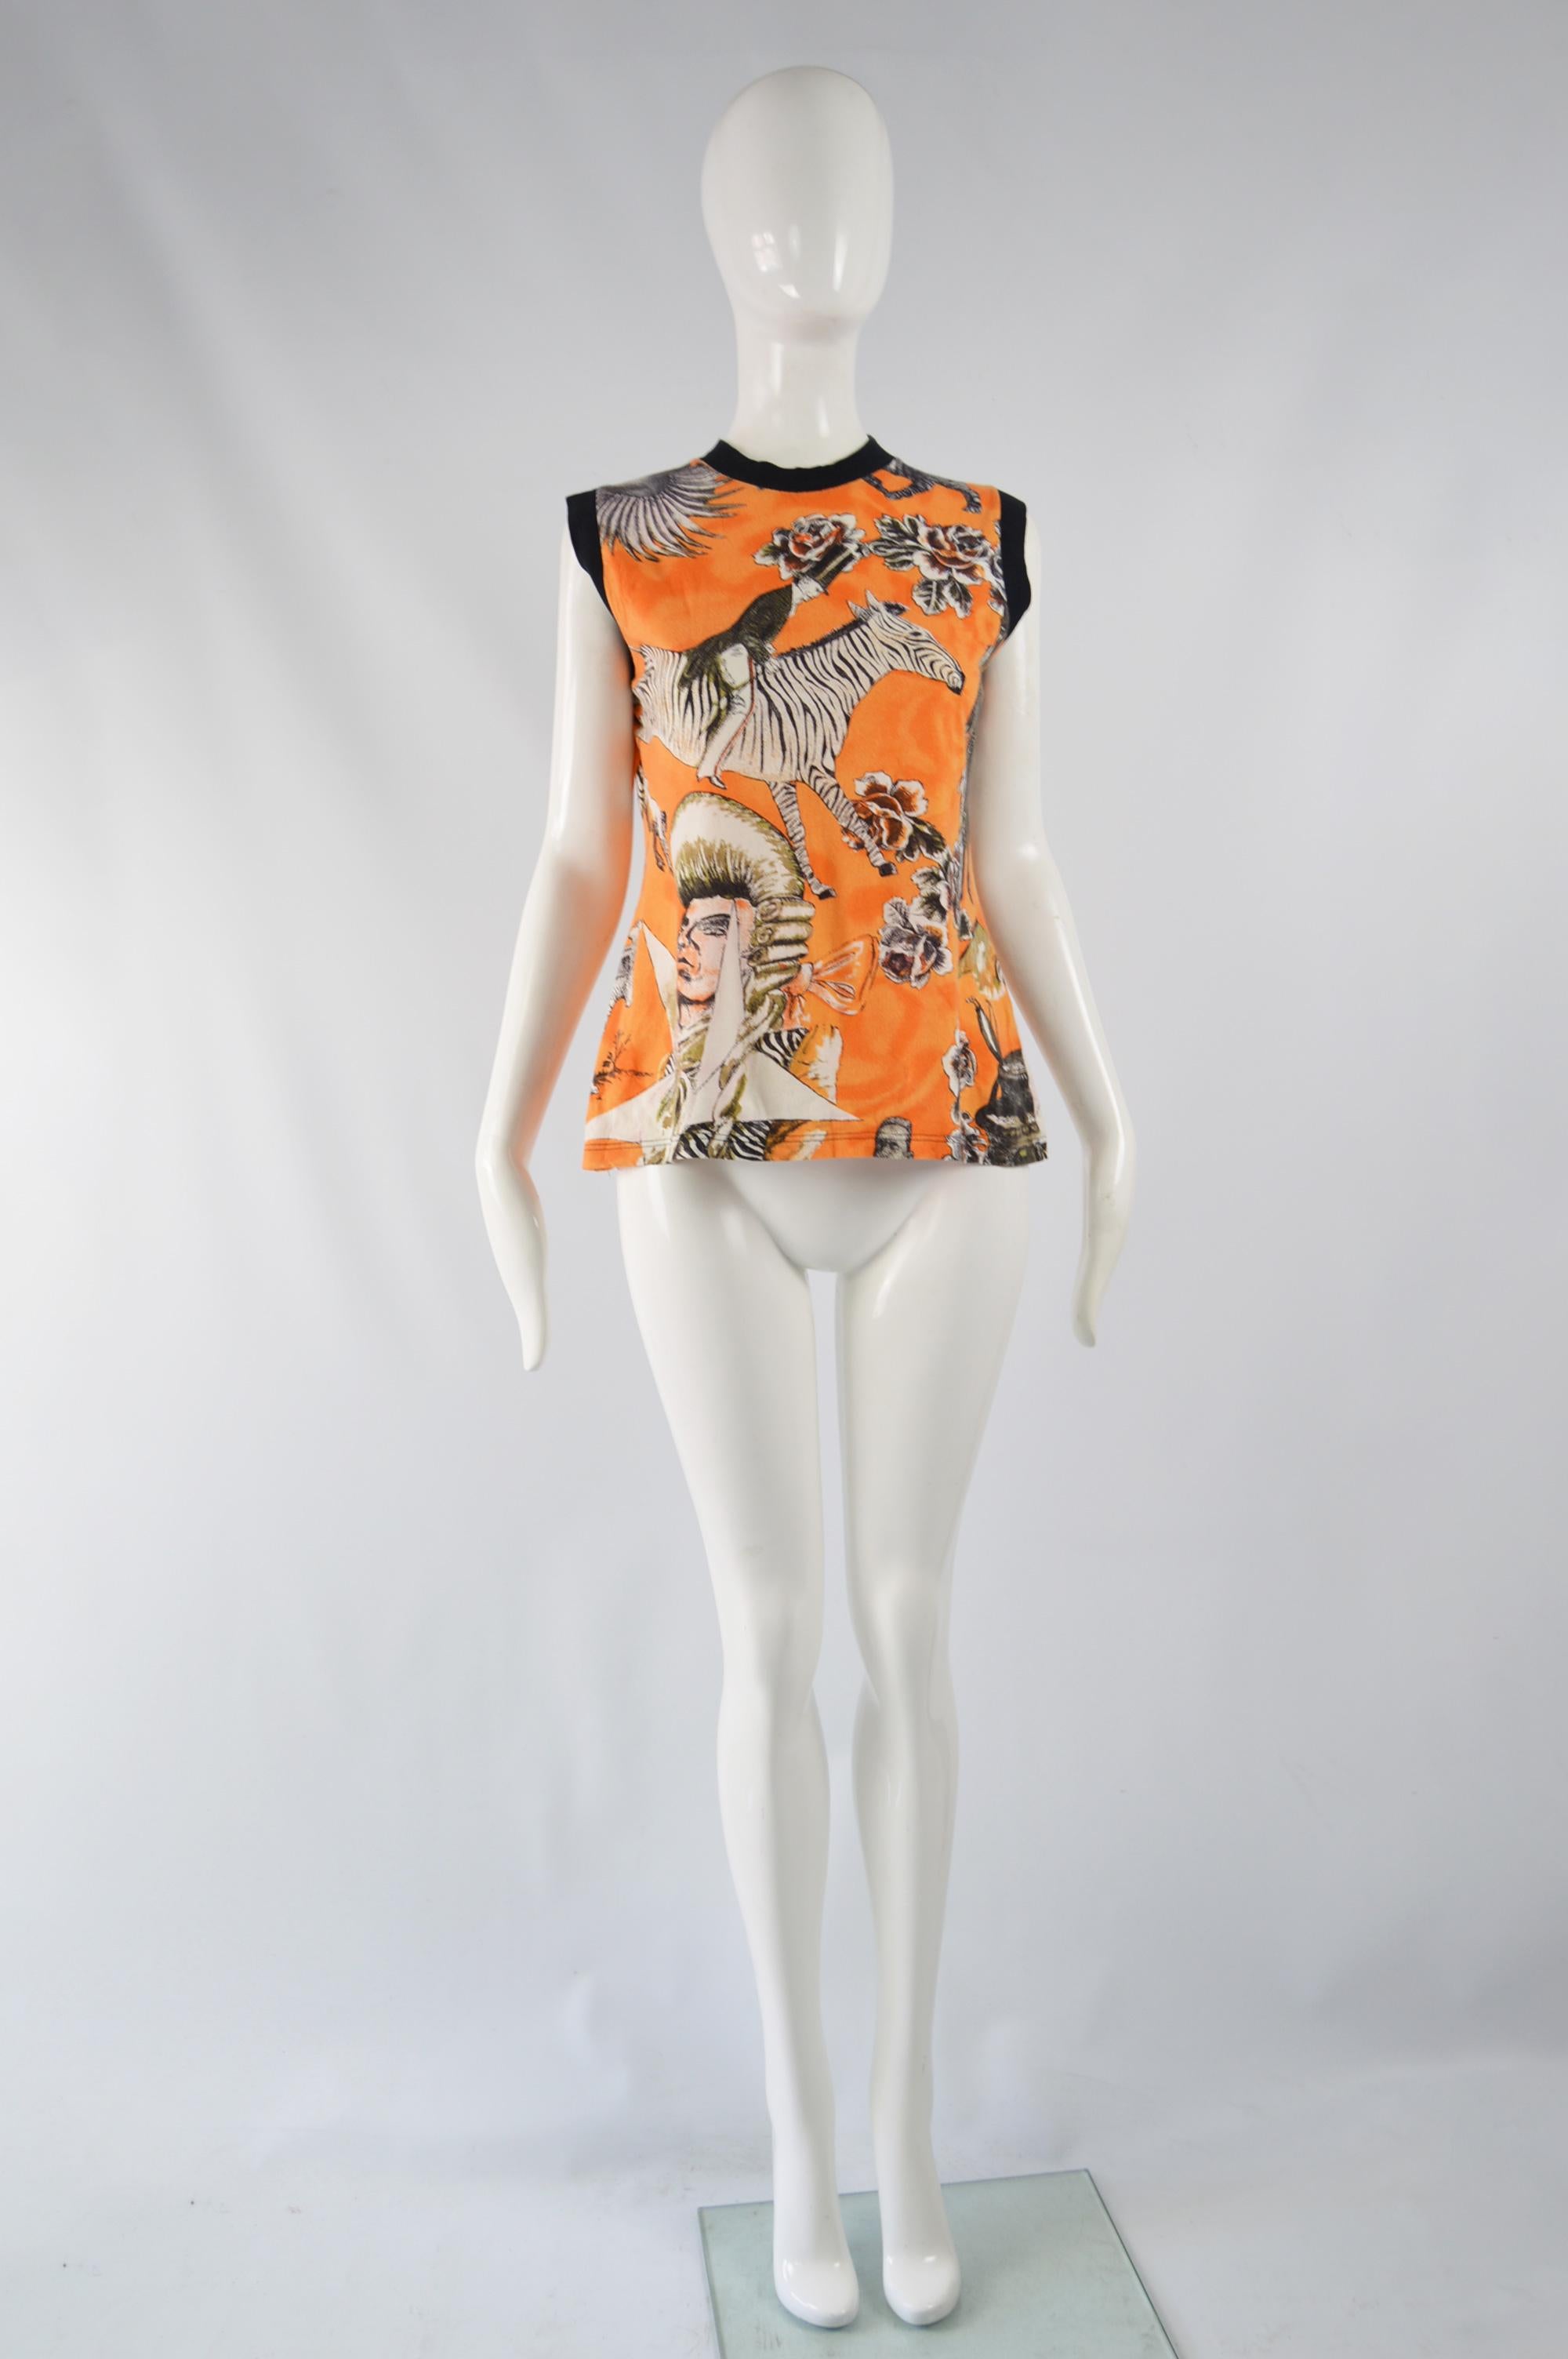 A great vintage women's sleeveless t shirt / tank top from the 80s by iconic French fashion designer, Jean Paul Gaultier. In an orange cotton jersey with a black ribbed trim and an amazing, fun print throughout with crazy, eccentric imagery that